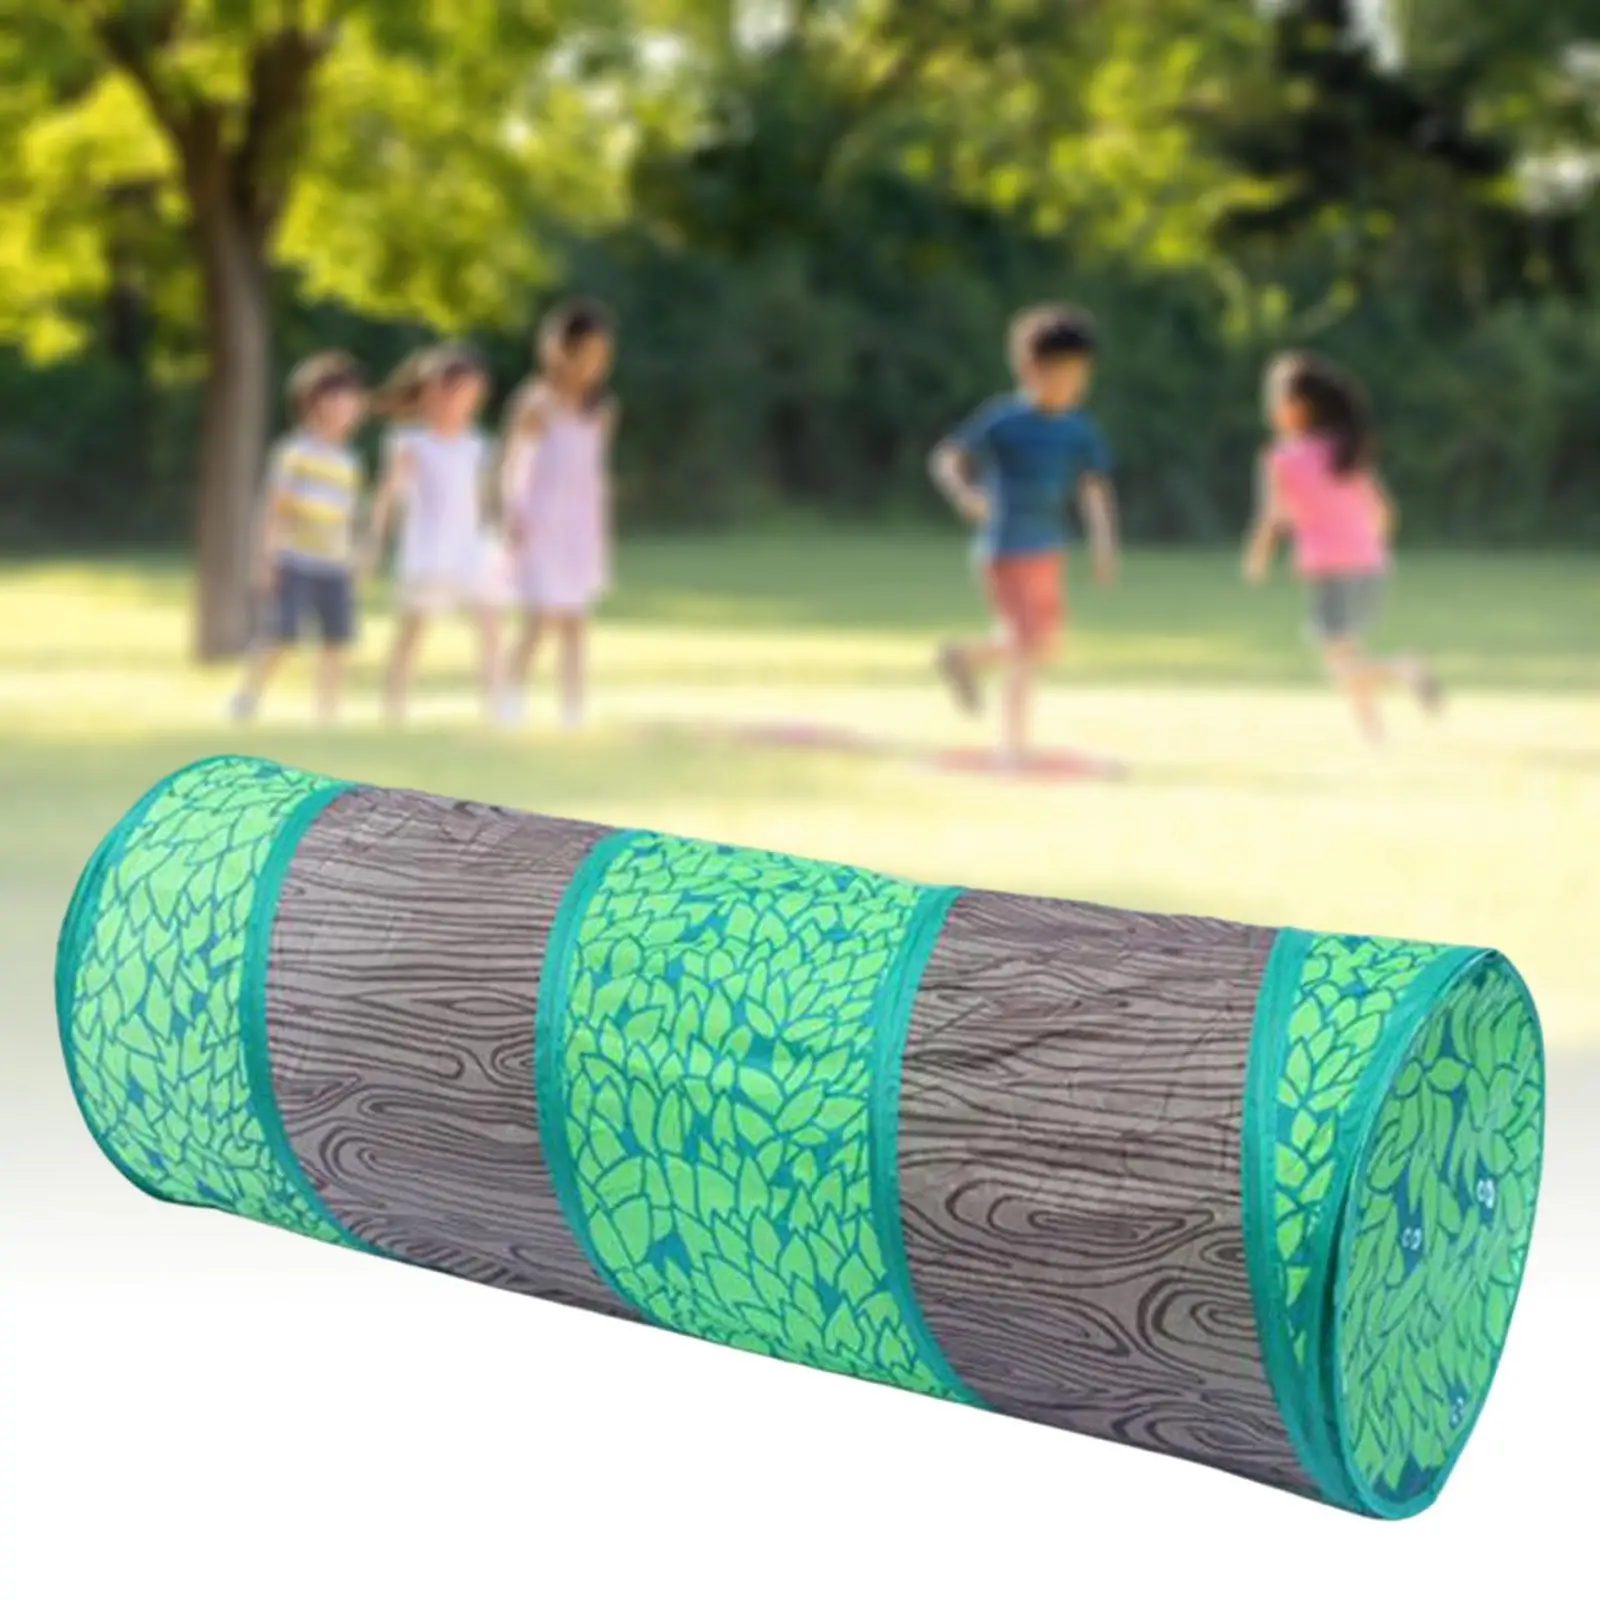 Kids Play Tunnel Indoor Outdoor Developmental Activity Toy Indoor Crawl Tube Pop up Crawl Baby Tunnel Toy for Pets Great Gift